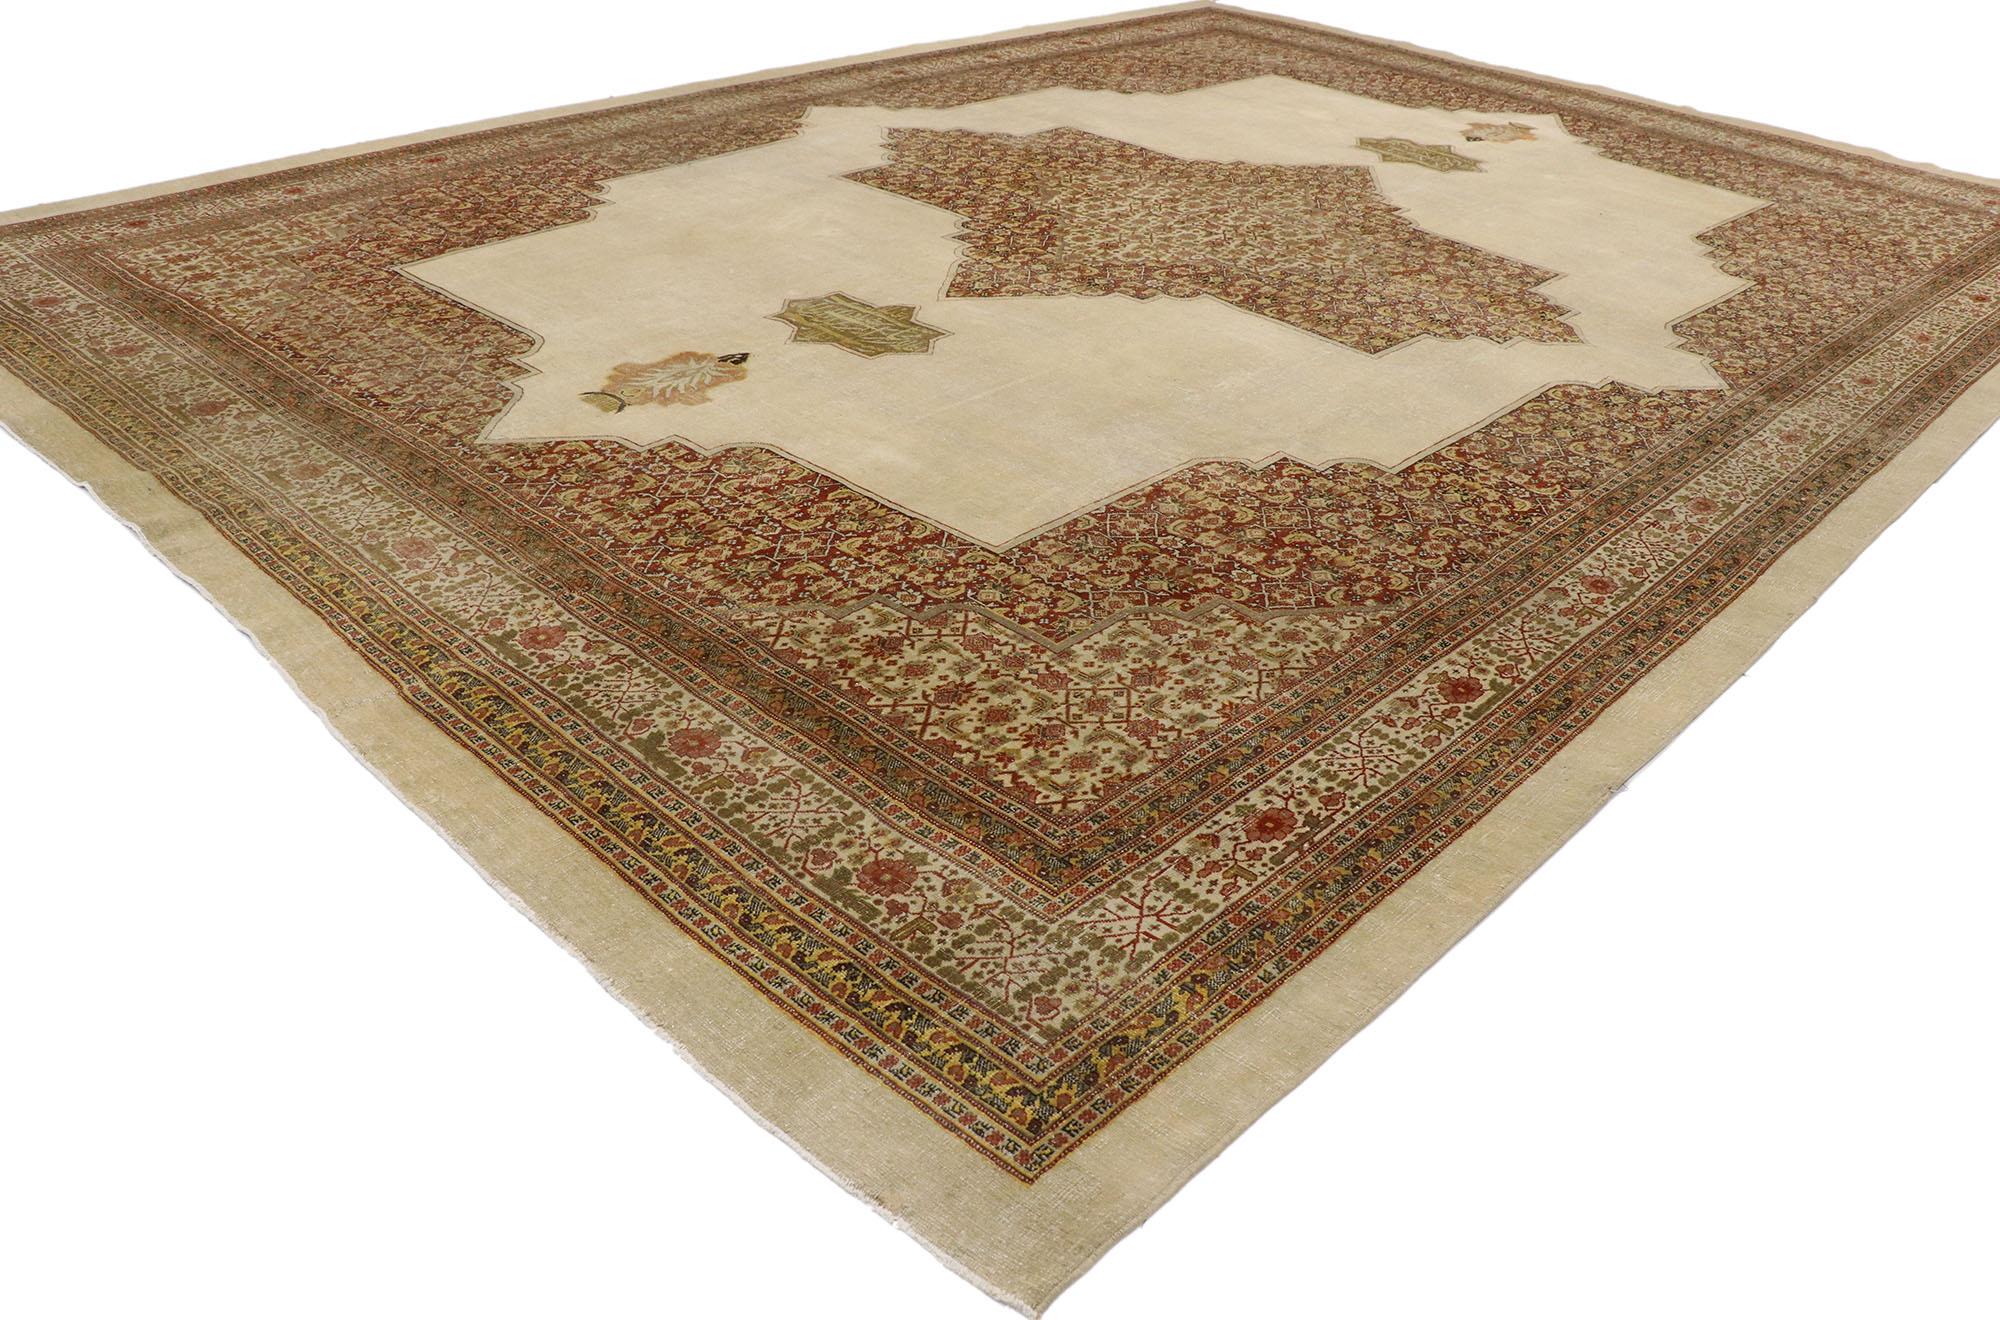 53250 distressed antique Persian Tabriz rug with Modern Rustic Artisan style. With ornate details and a lovingly time-worn composition, this hand knotted wool distressed antique Persian Tabriz rug is poised to impress. The abrashed beige field